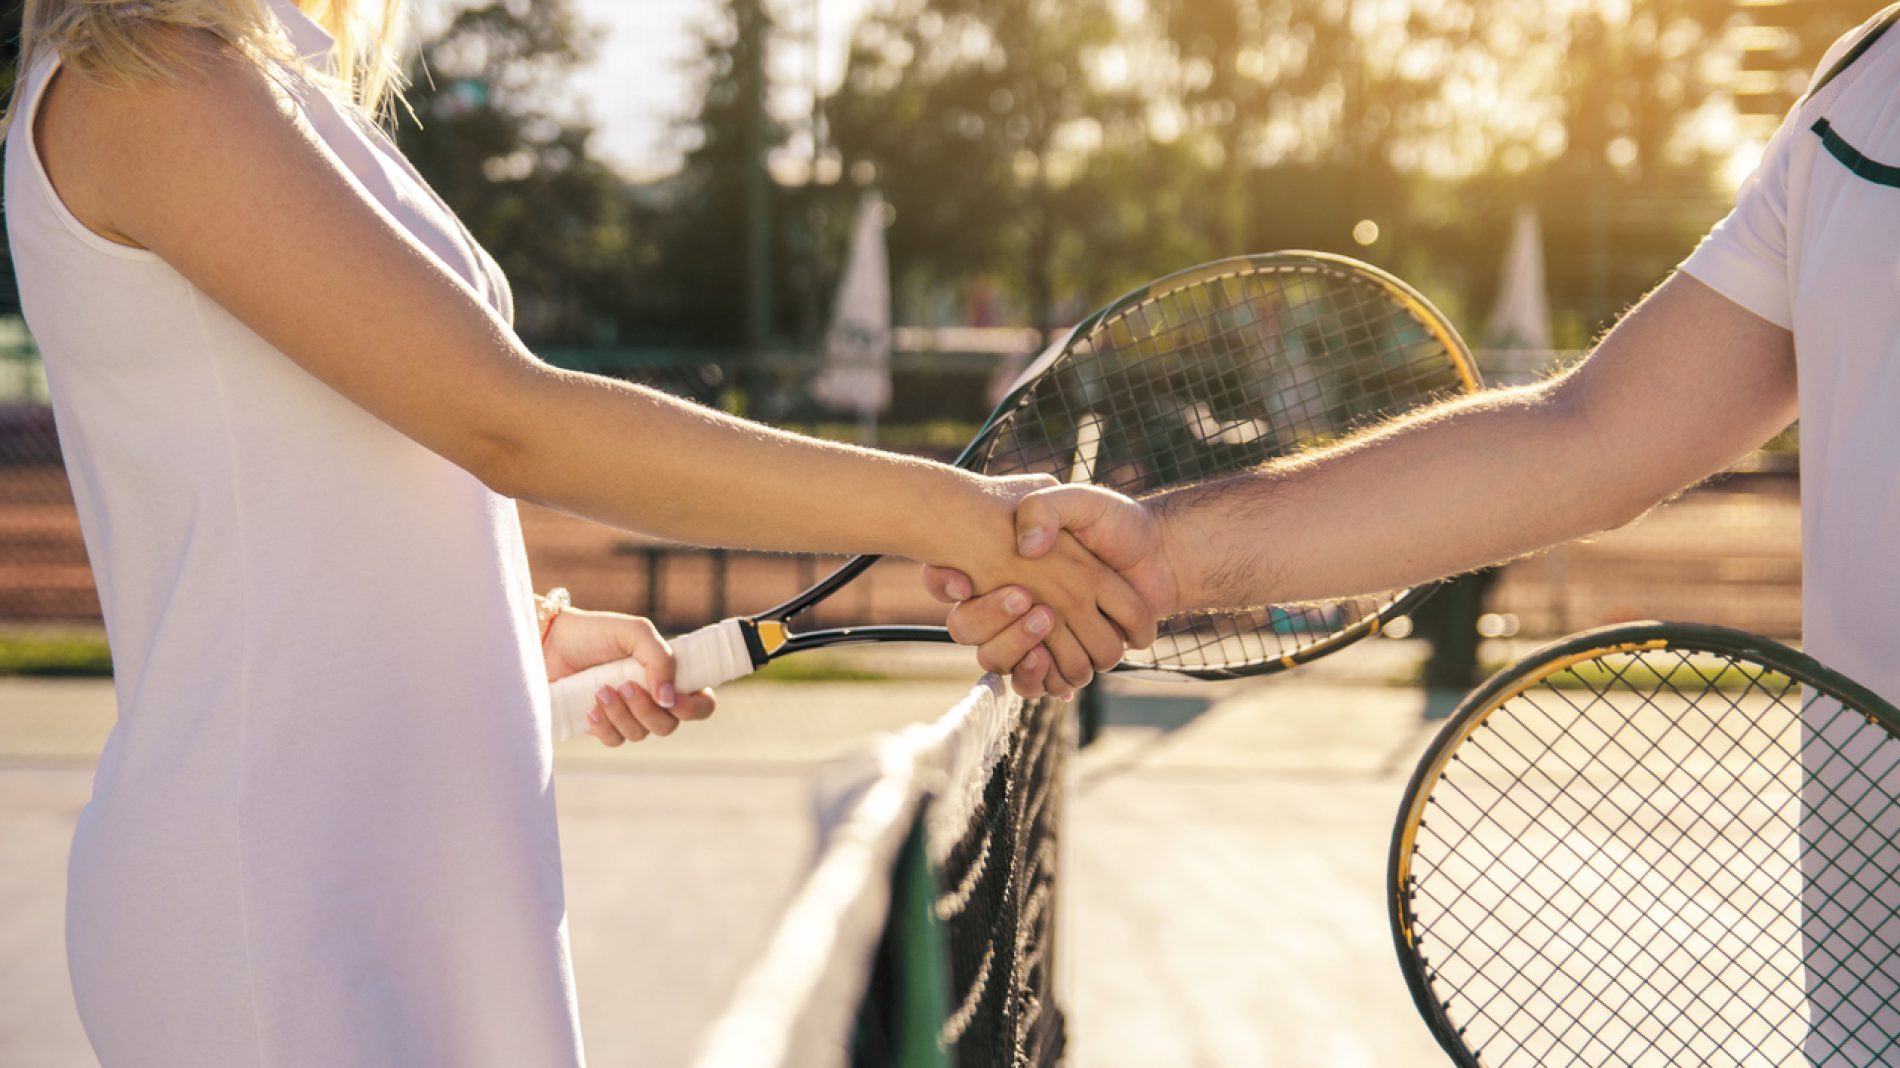 Male and female tennis players shaking hands on net